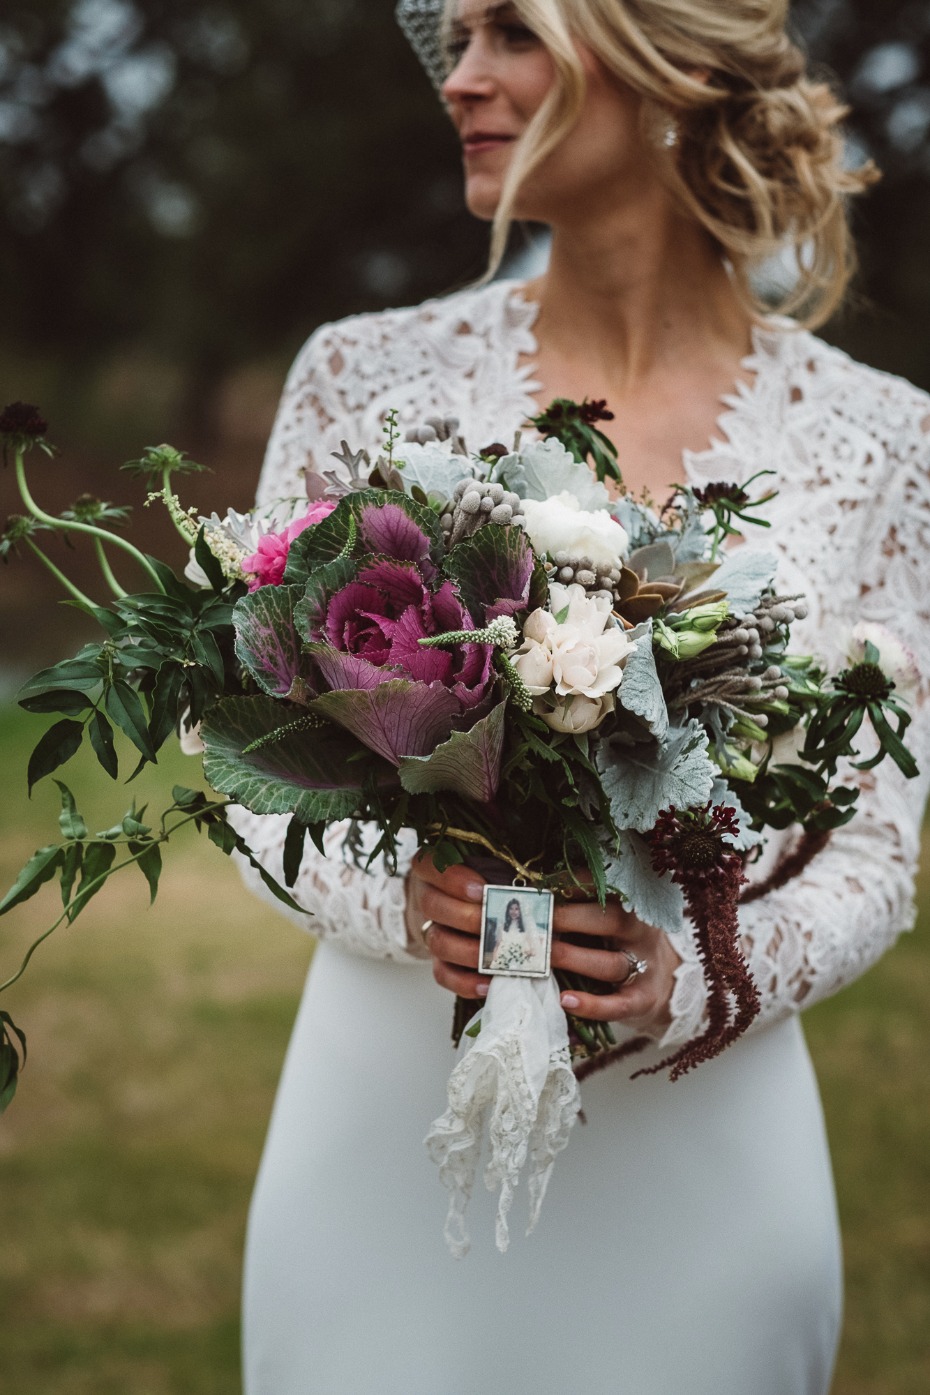 Gorgeous bouquet captured by Mercedes Morgan Photography